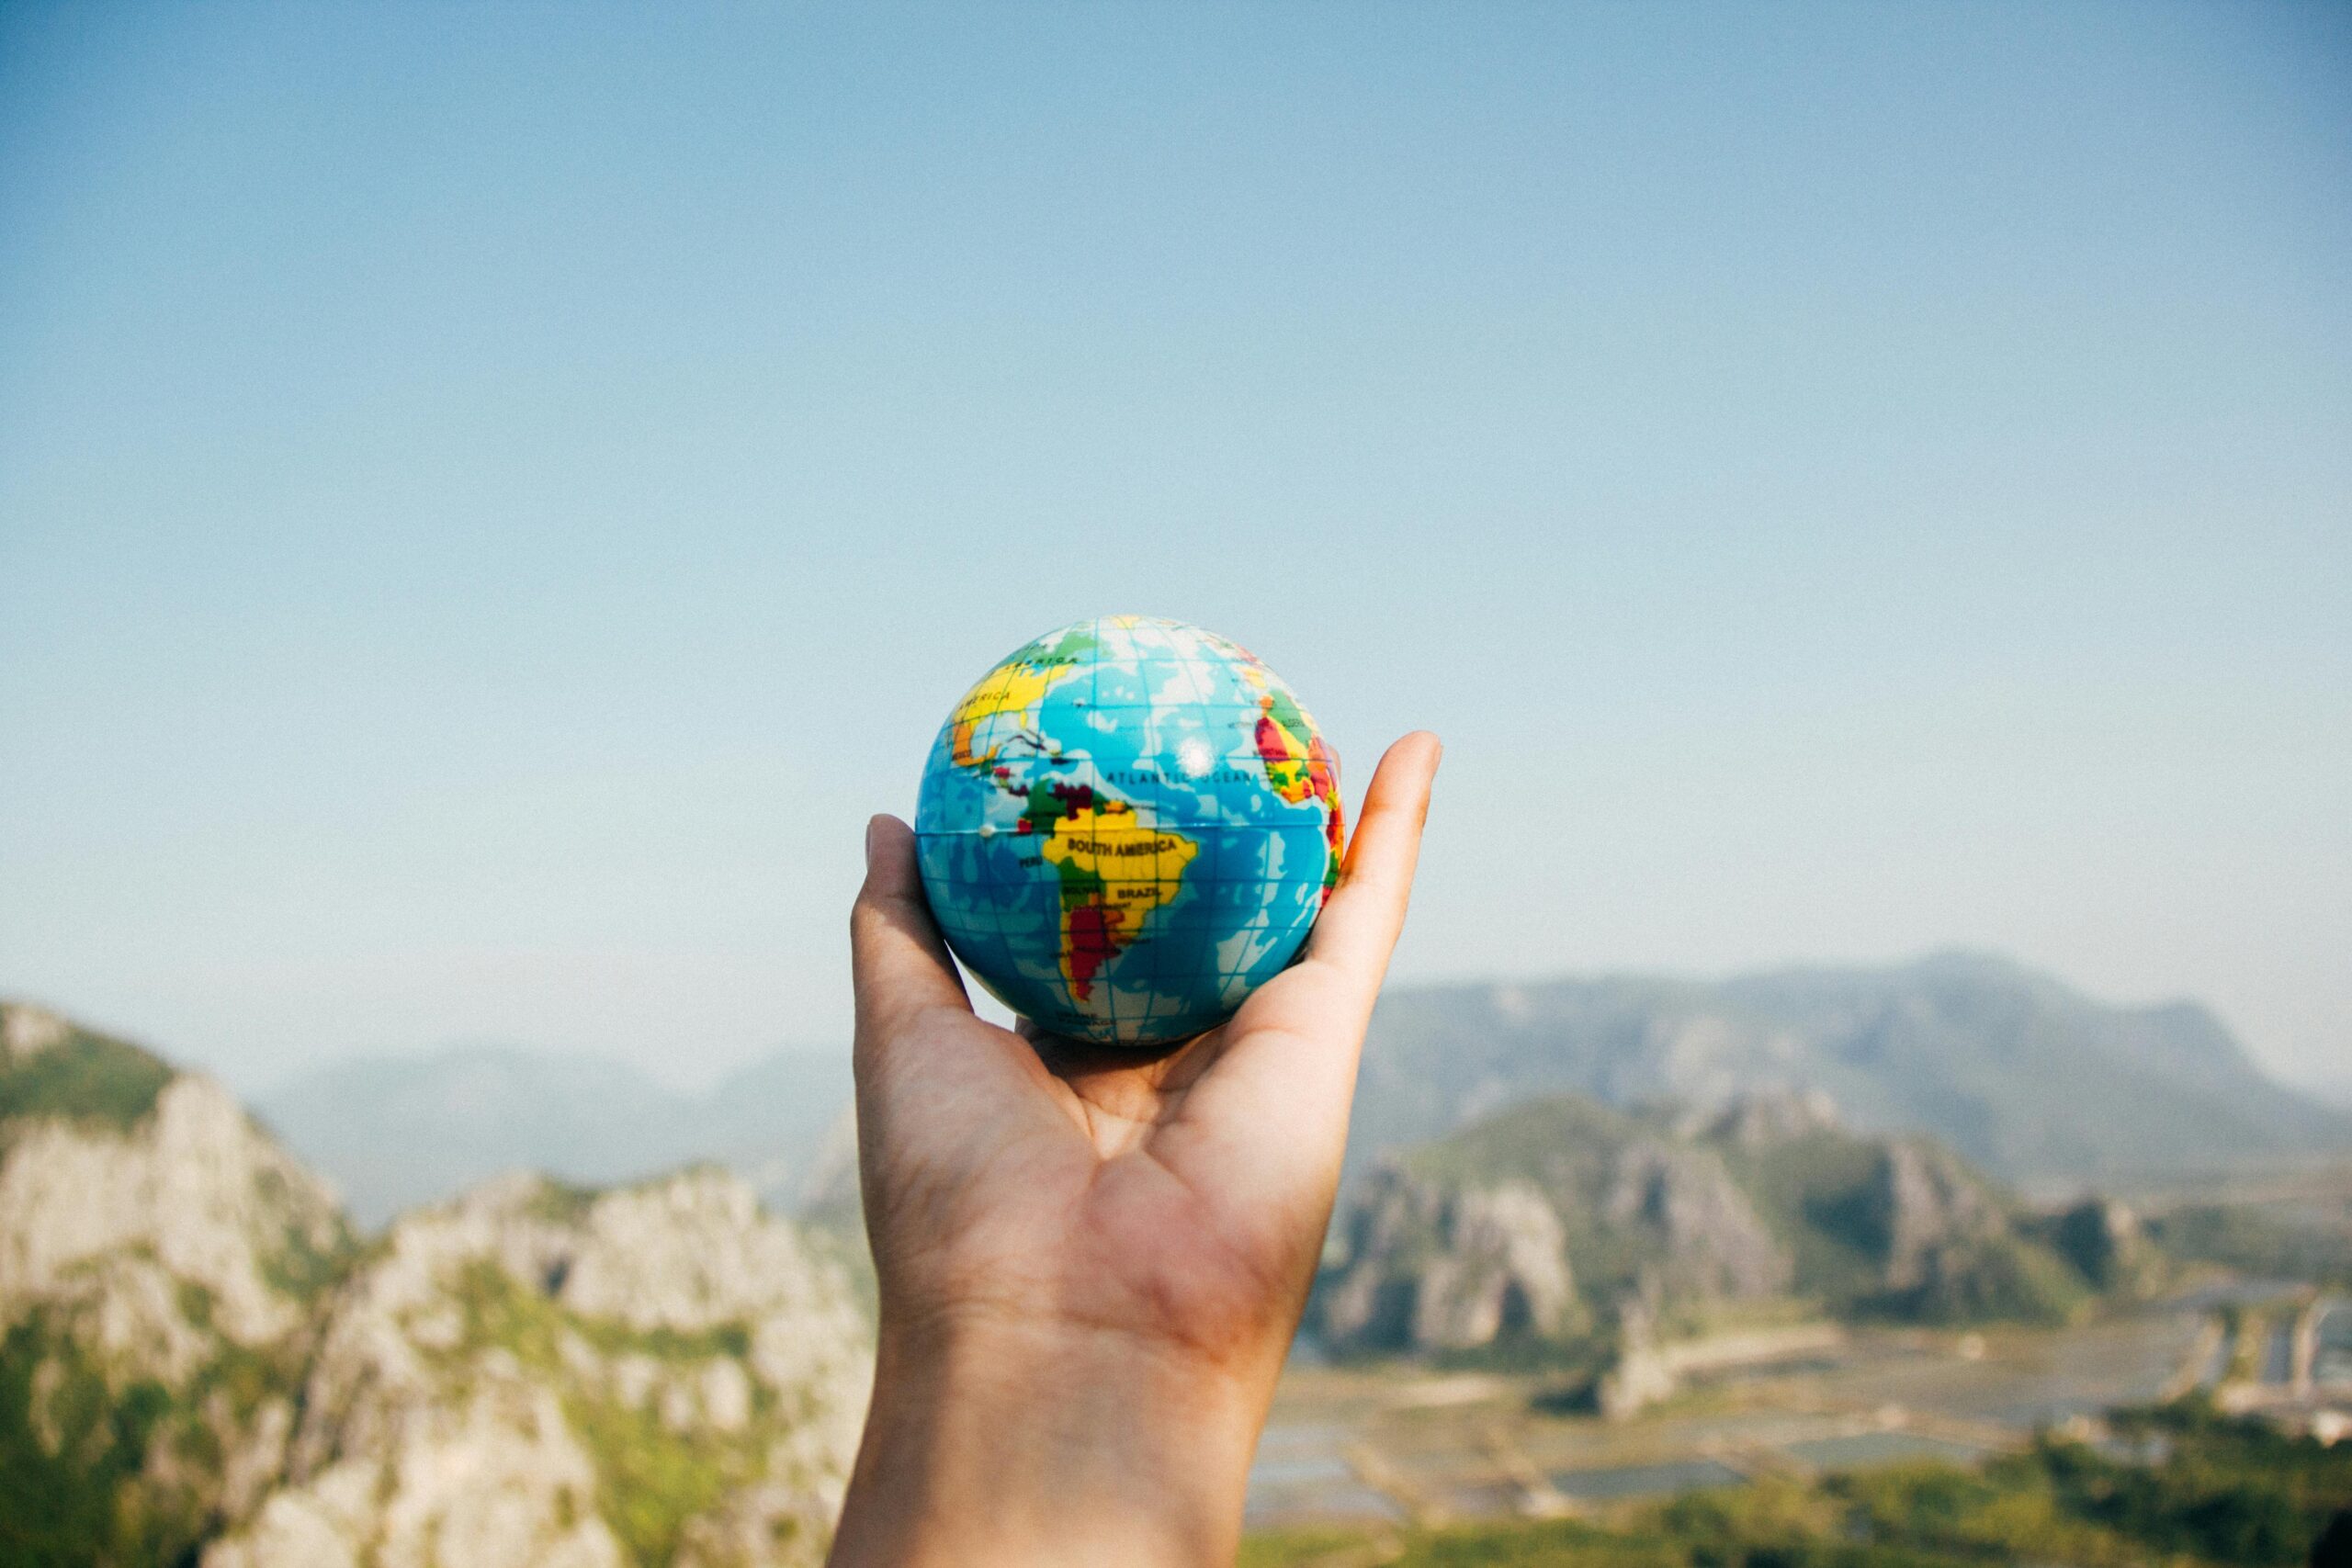 Hand holding a globe in front of a mountain landscape, emphasizing the globalized nature of the international school approach.